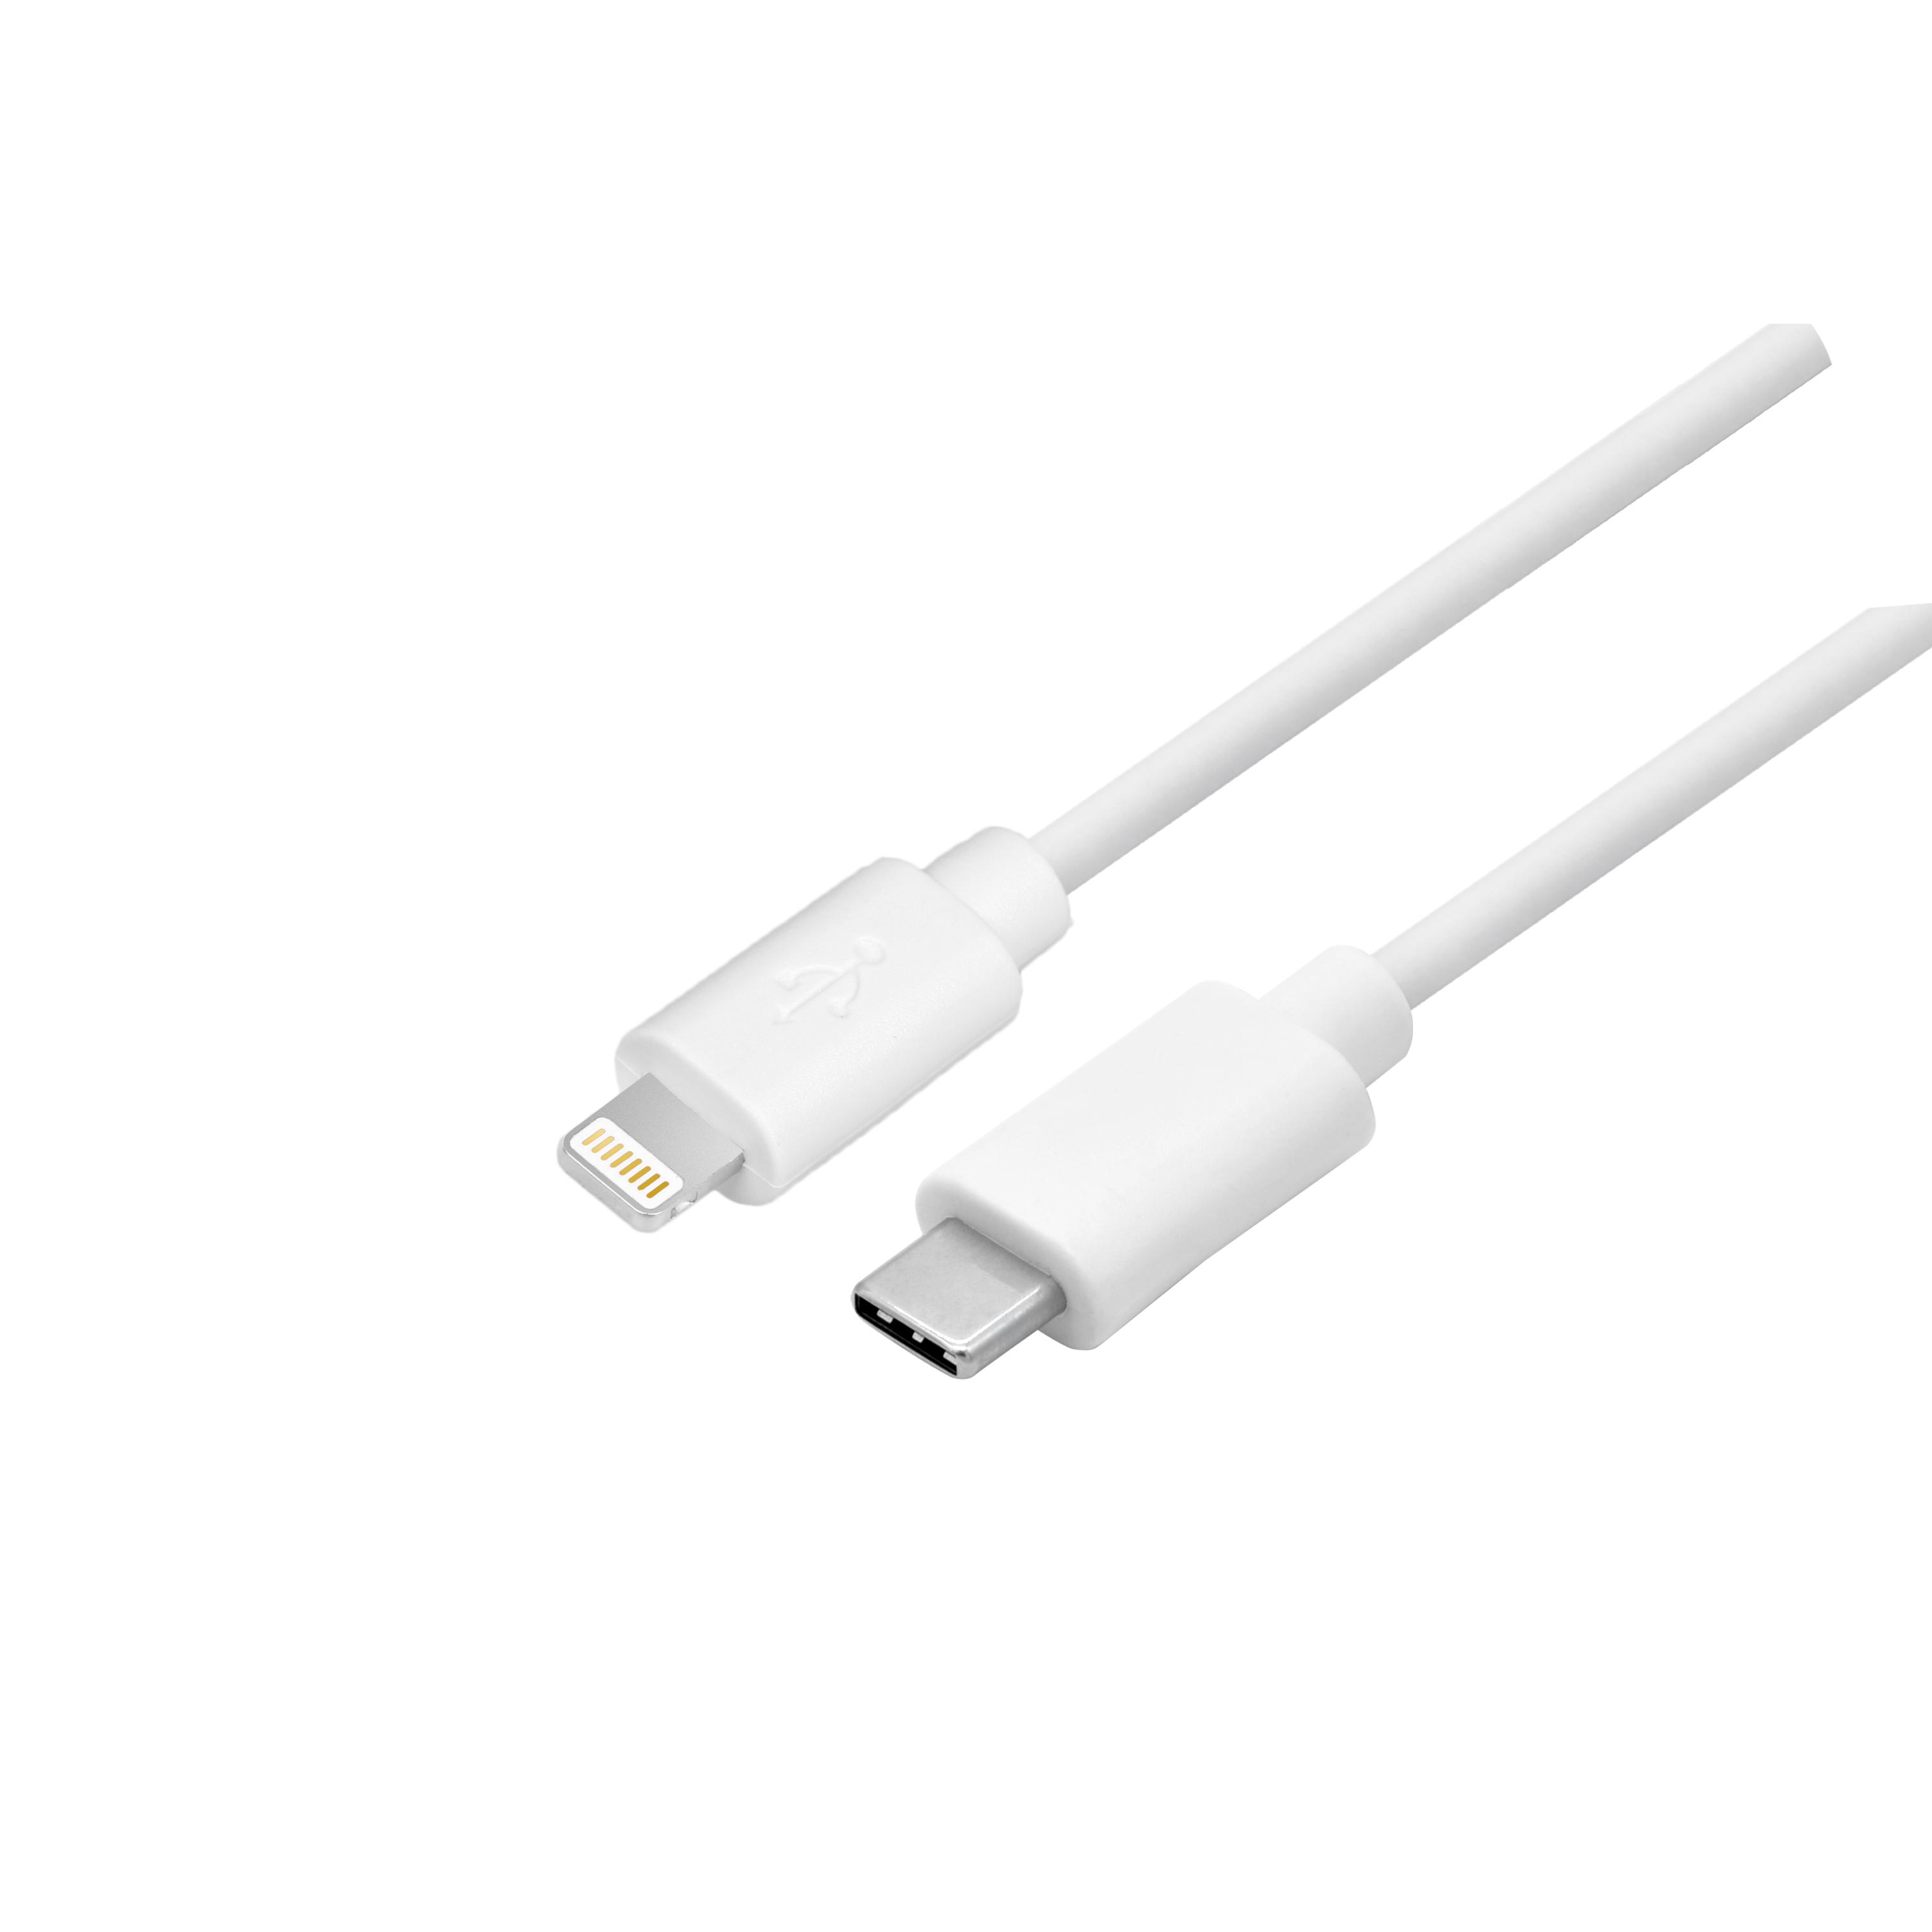 Coolbox - Cable USB-C a conector Lightning, Transferencia de datos y Carga, Hasta 480Mbps, 1m